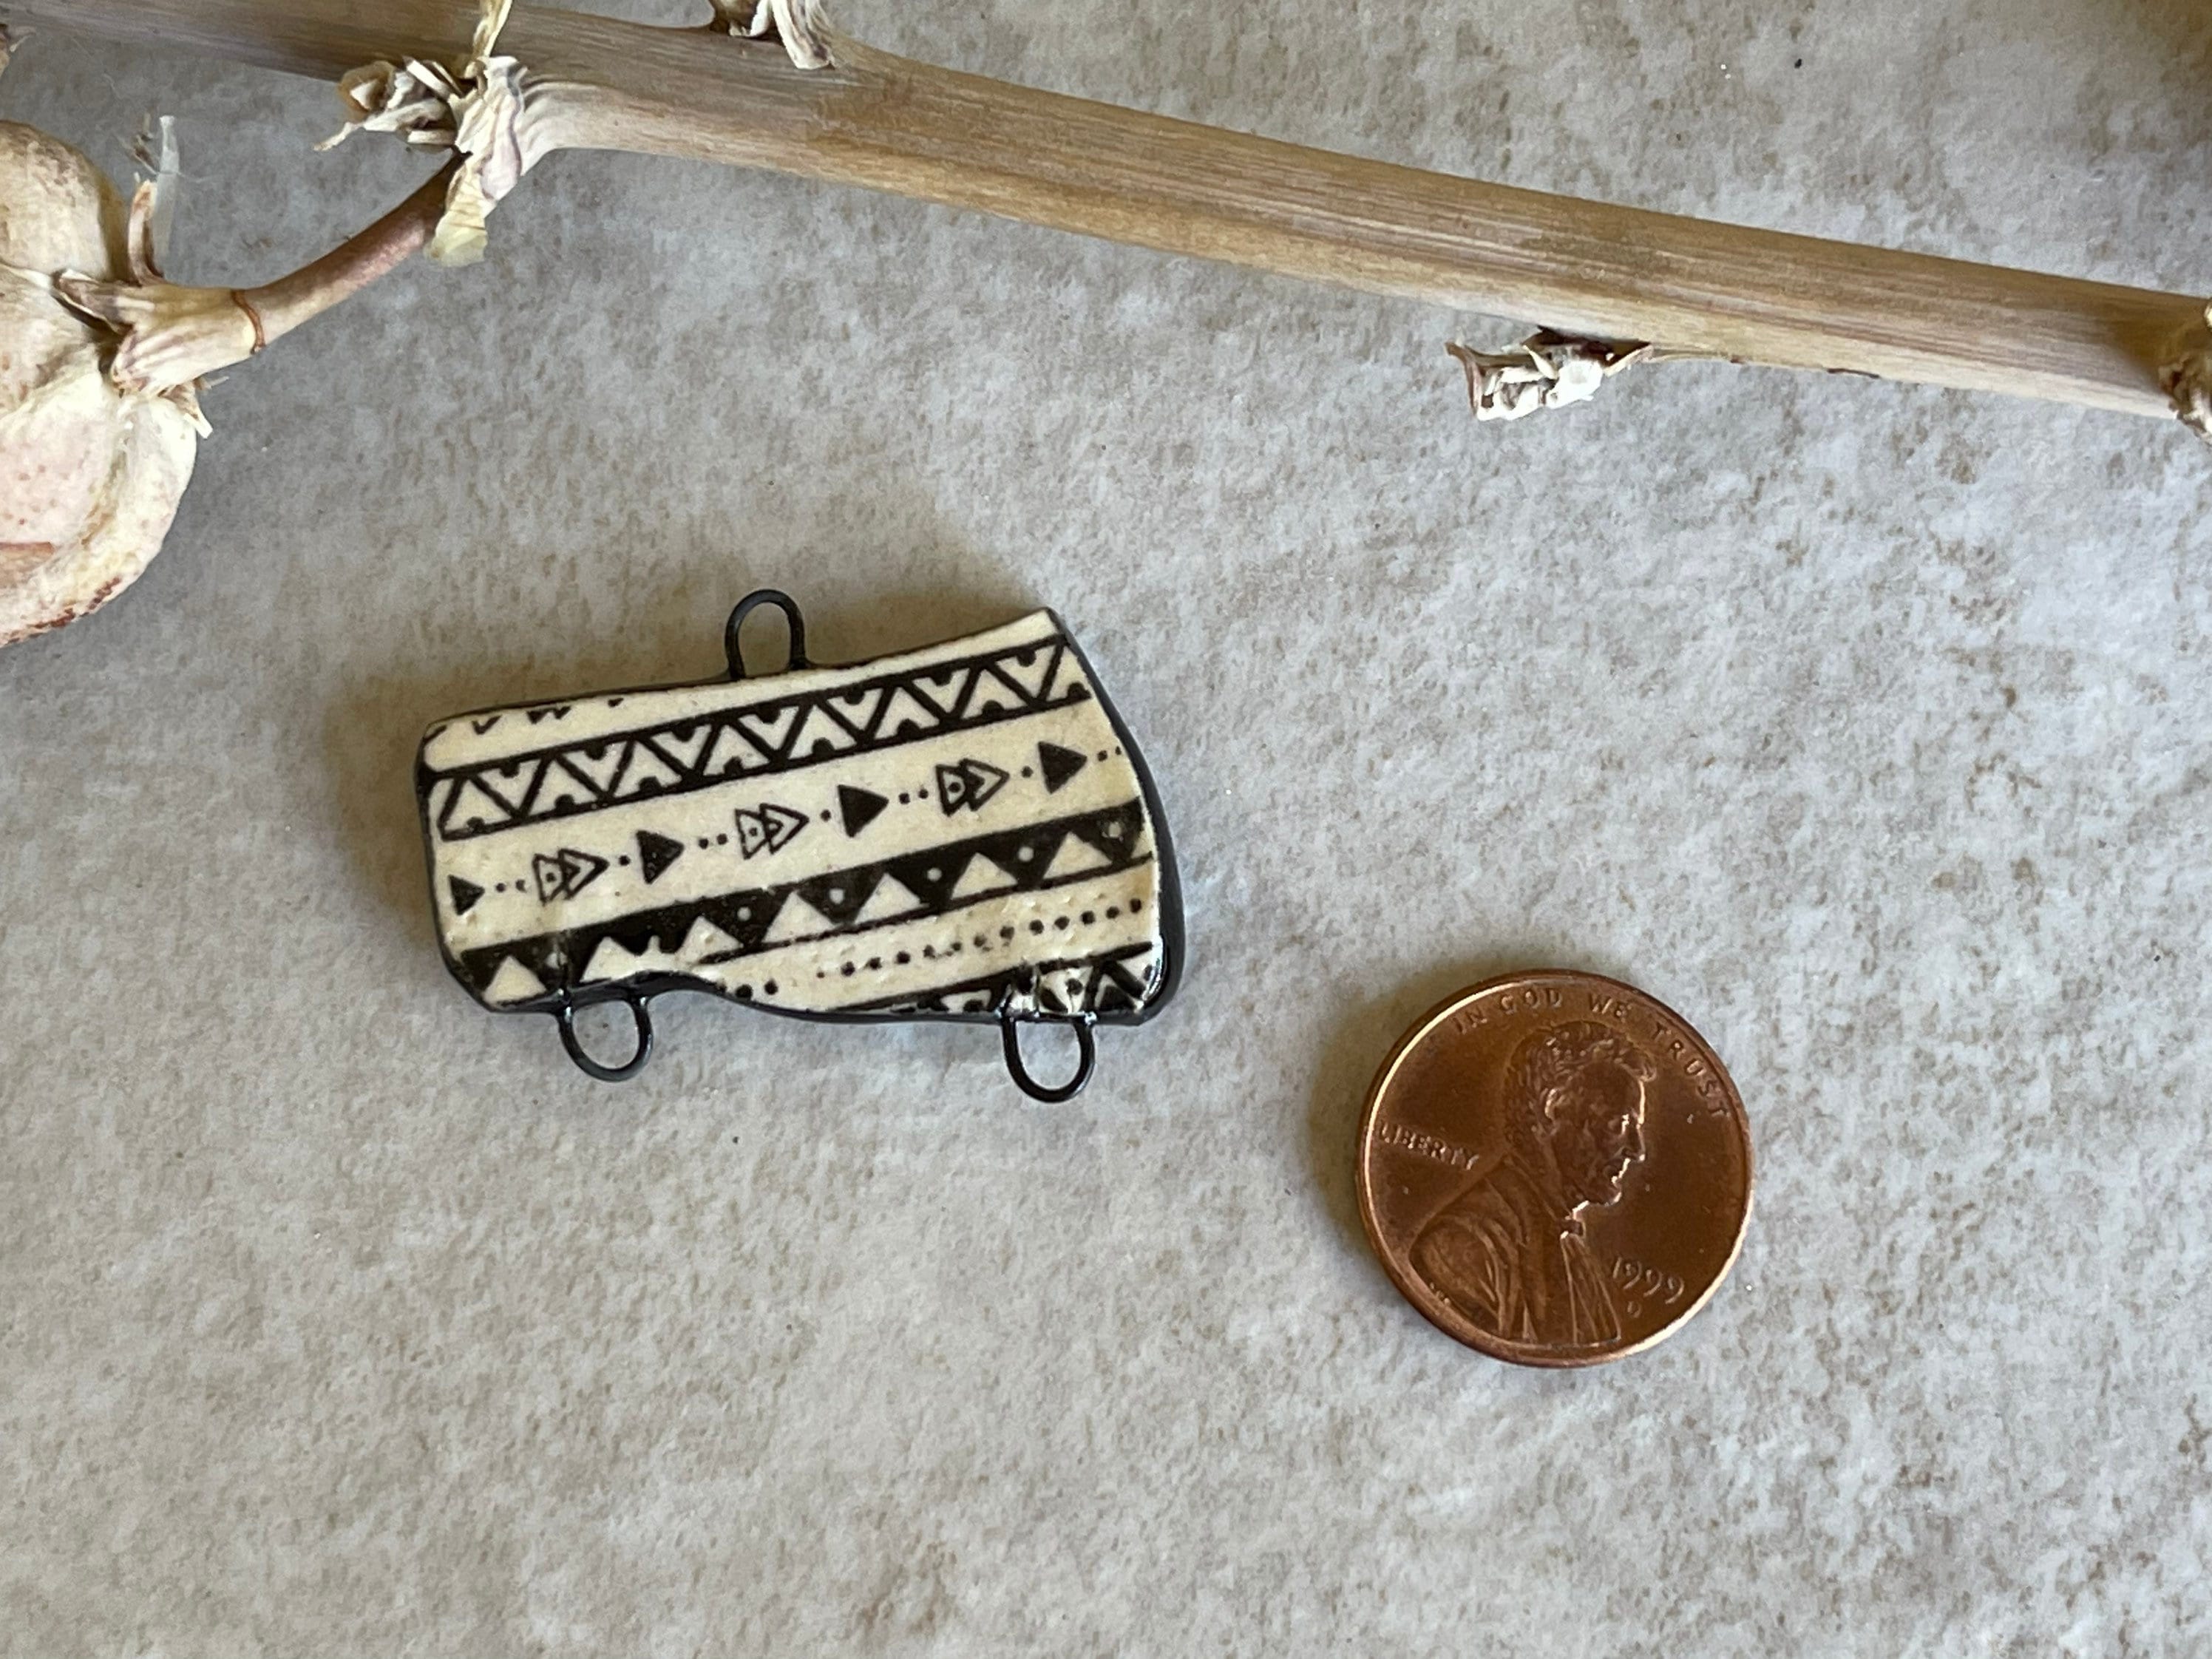 Black and White Pendant Bead, Porcelain Bead, Ceramic Charm, Jewelry Making Components, Pendant